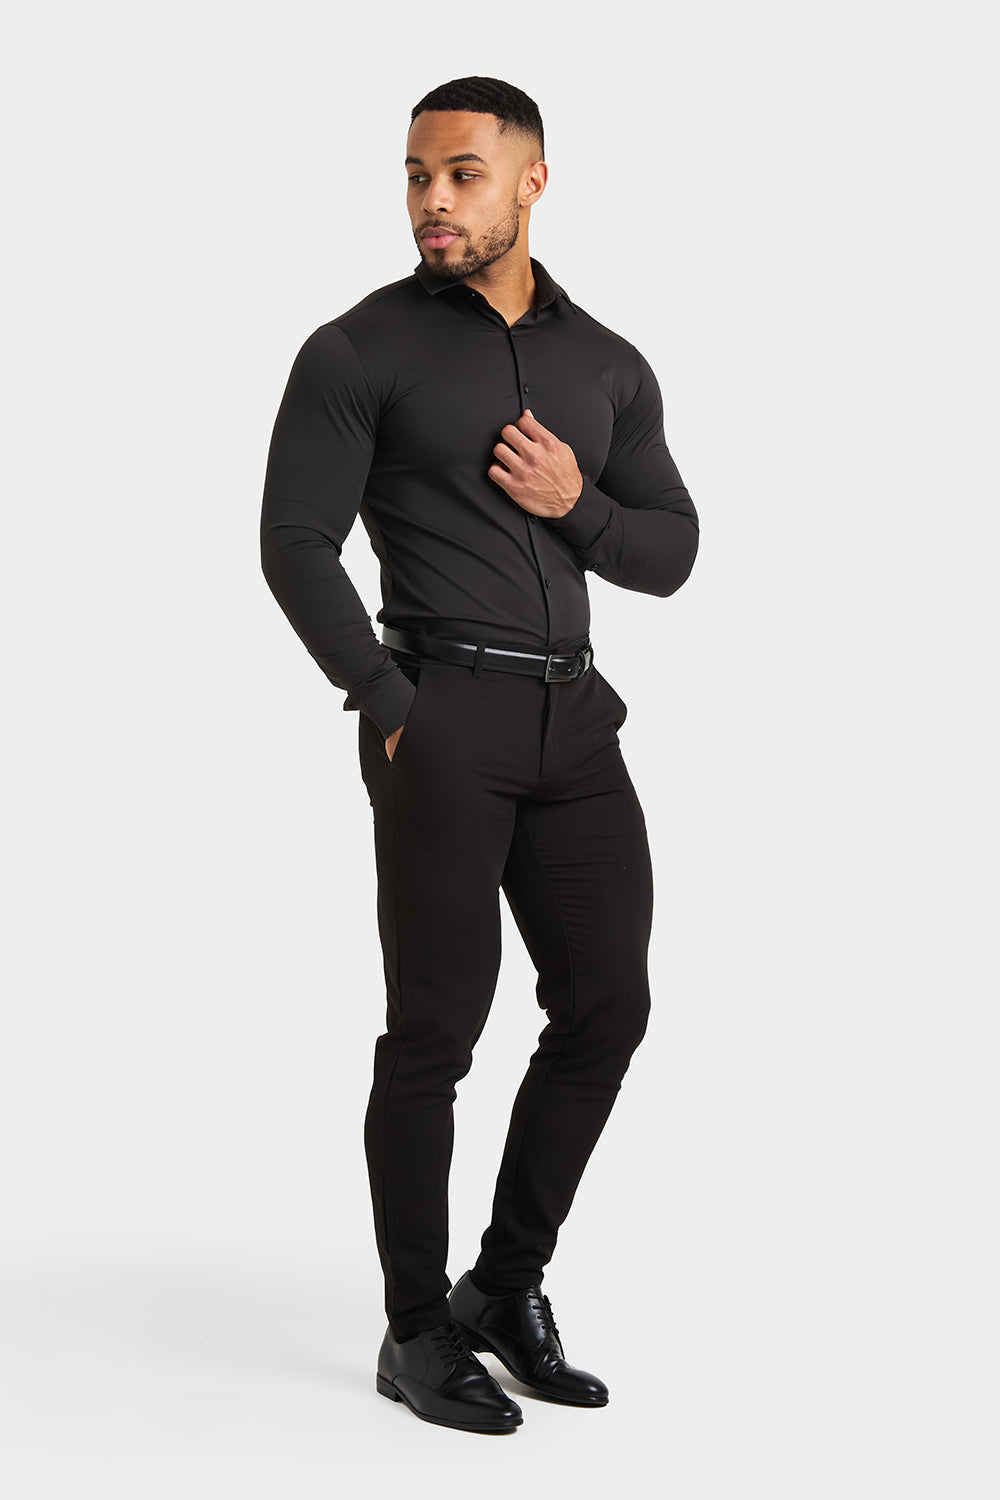 Muscle Fit Dress Shirt in Black - TAILORED ATHLETE - ROW